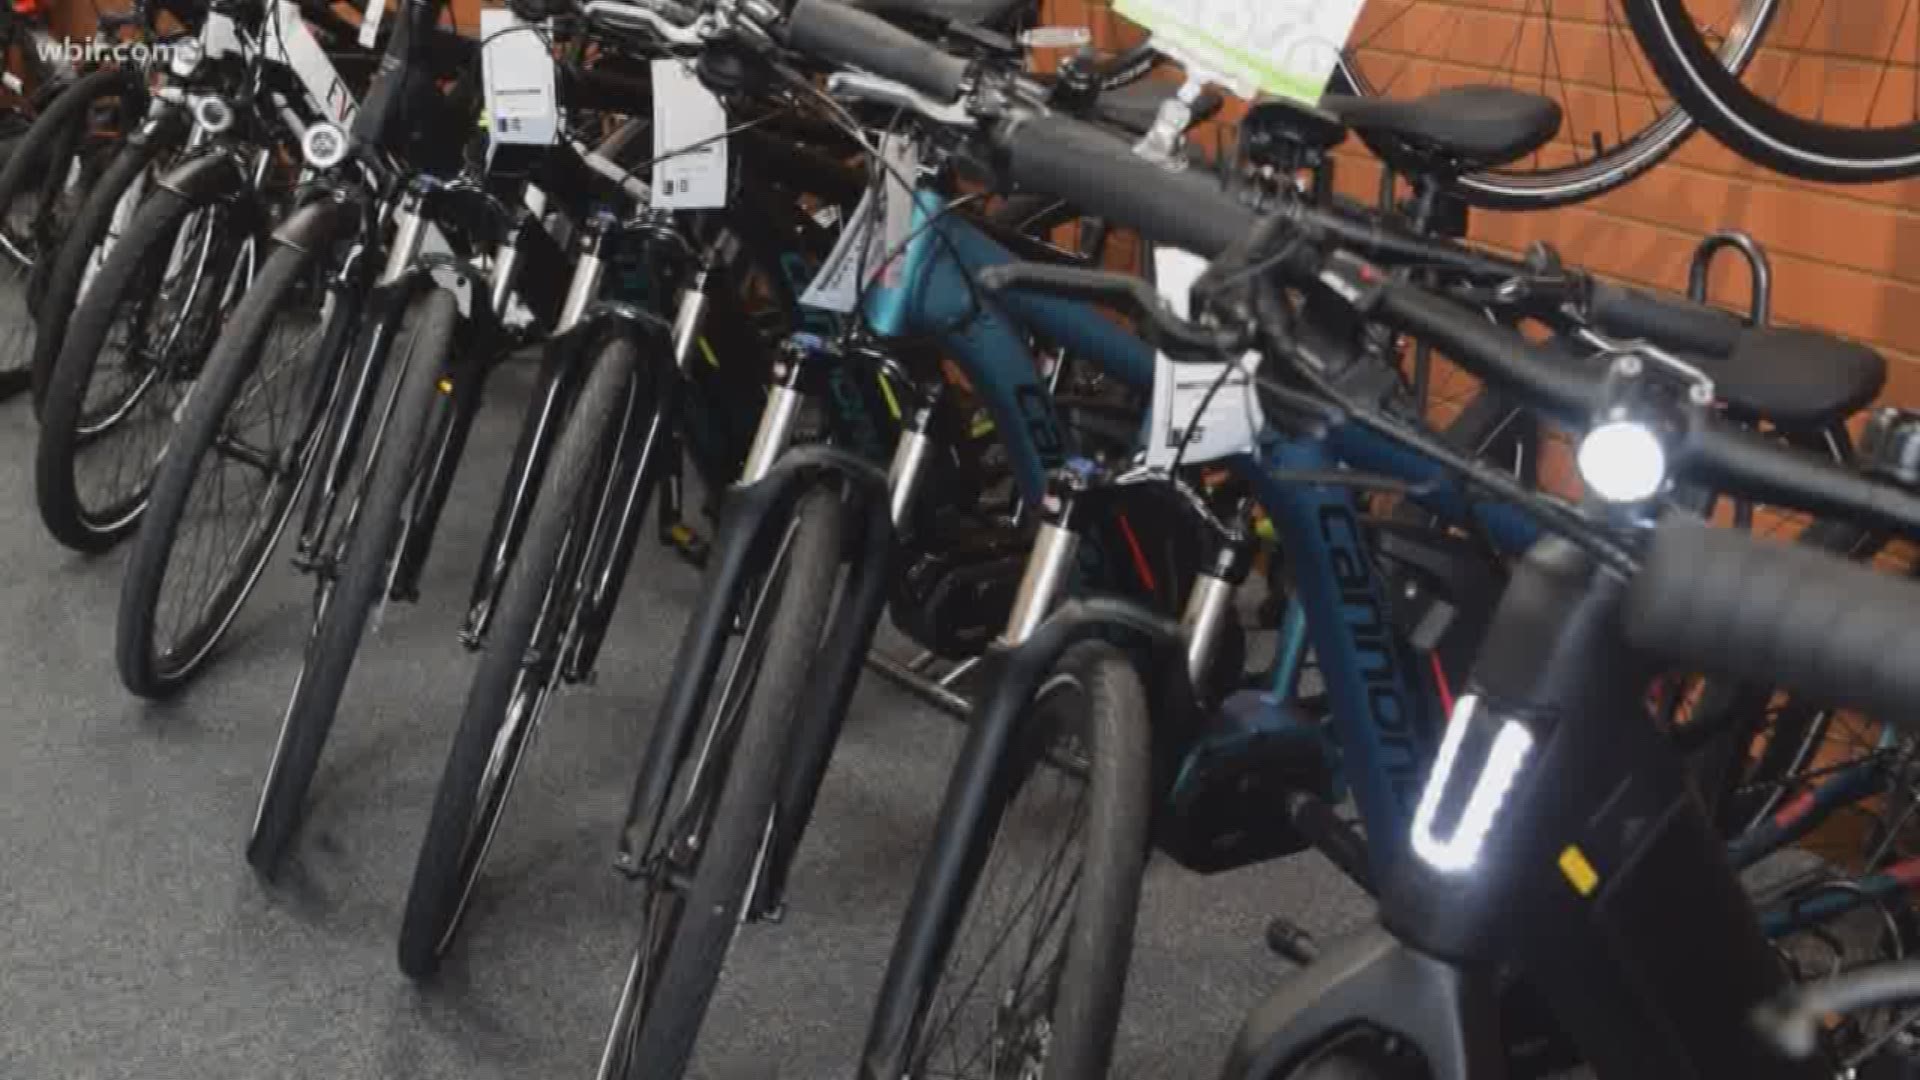 Electric bikes have been gaining popularity, but the state has implemented some laws regarding these special types of bikes.